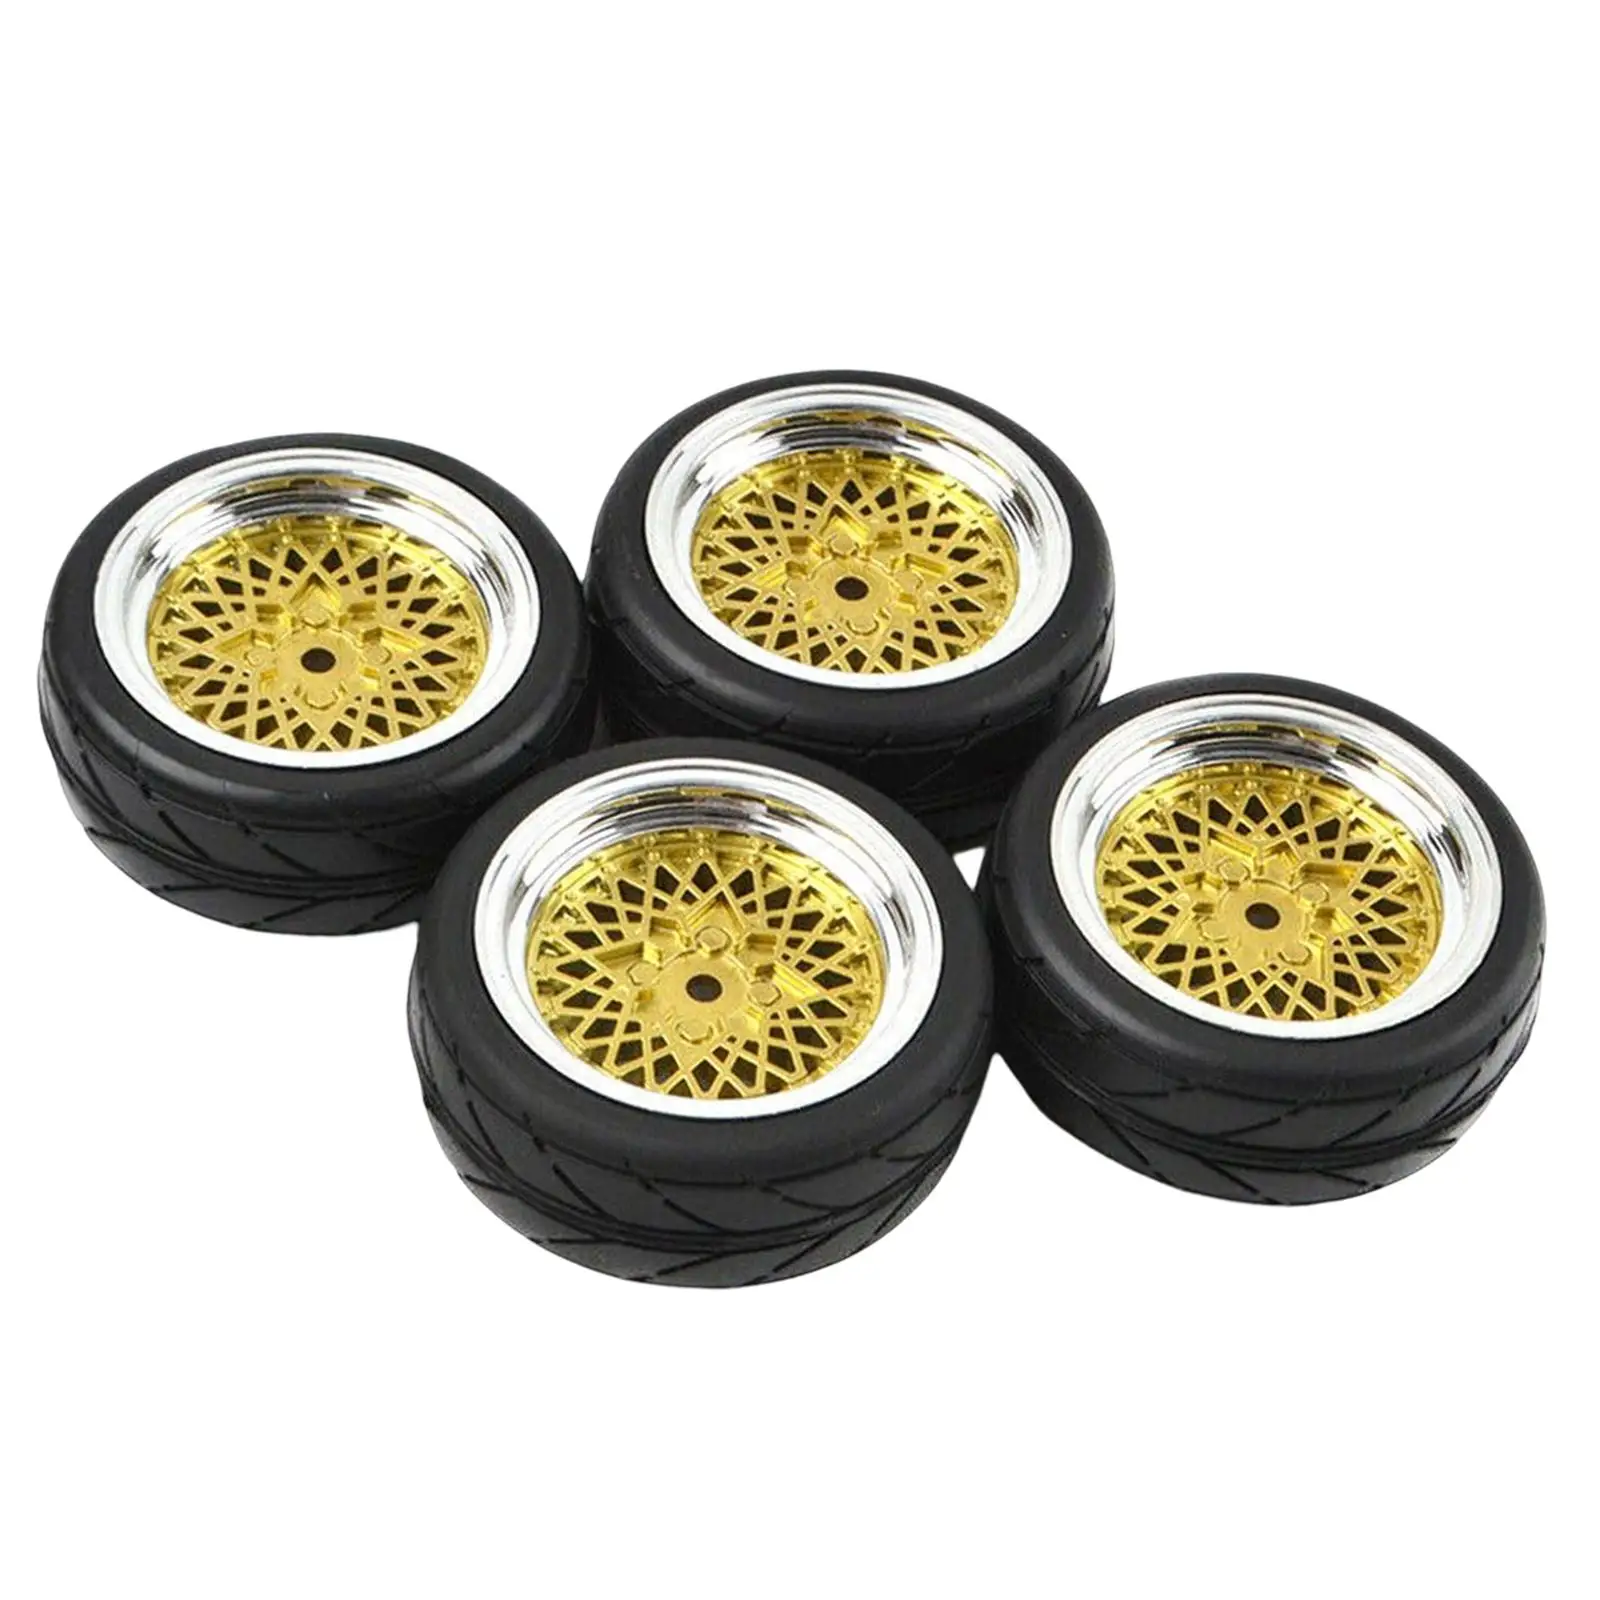 4 Pieces 1/10 Rubber Wheel Rim and Tires Spare for HSP HPI RC Car Crawler Vehicles